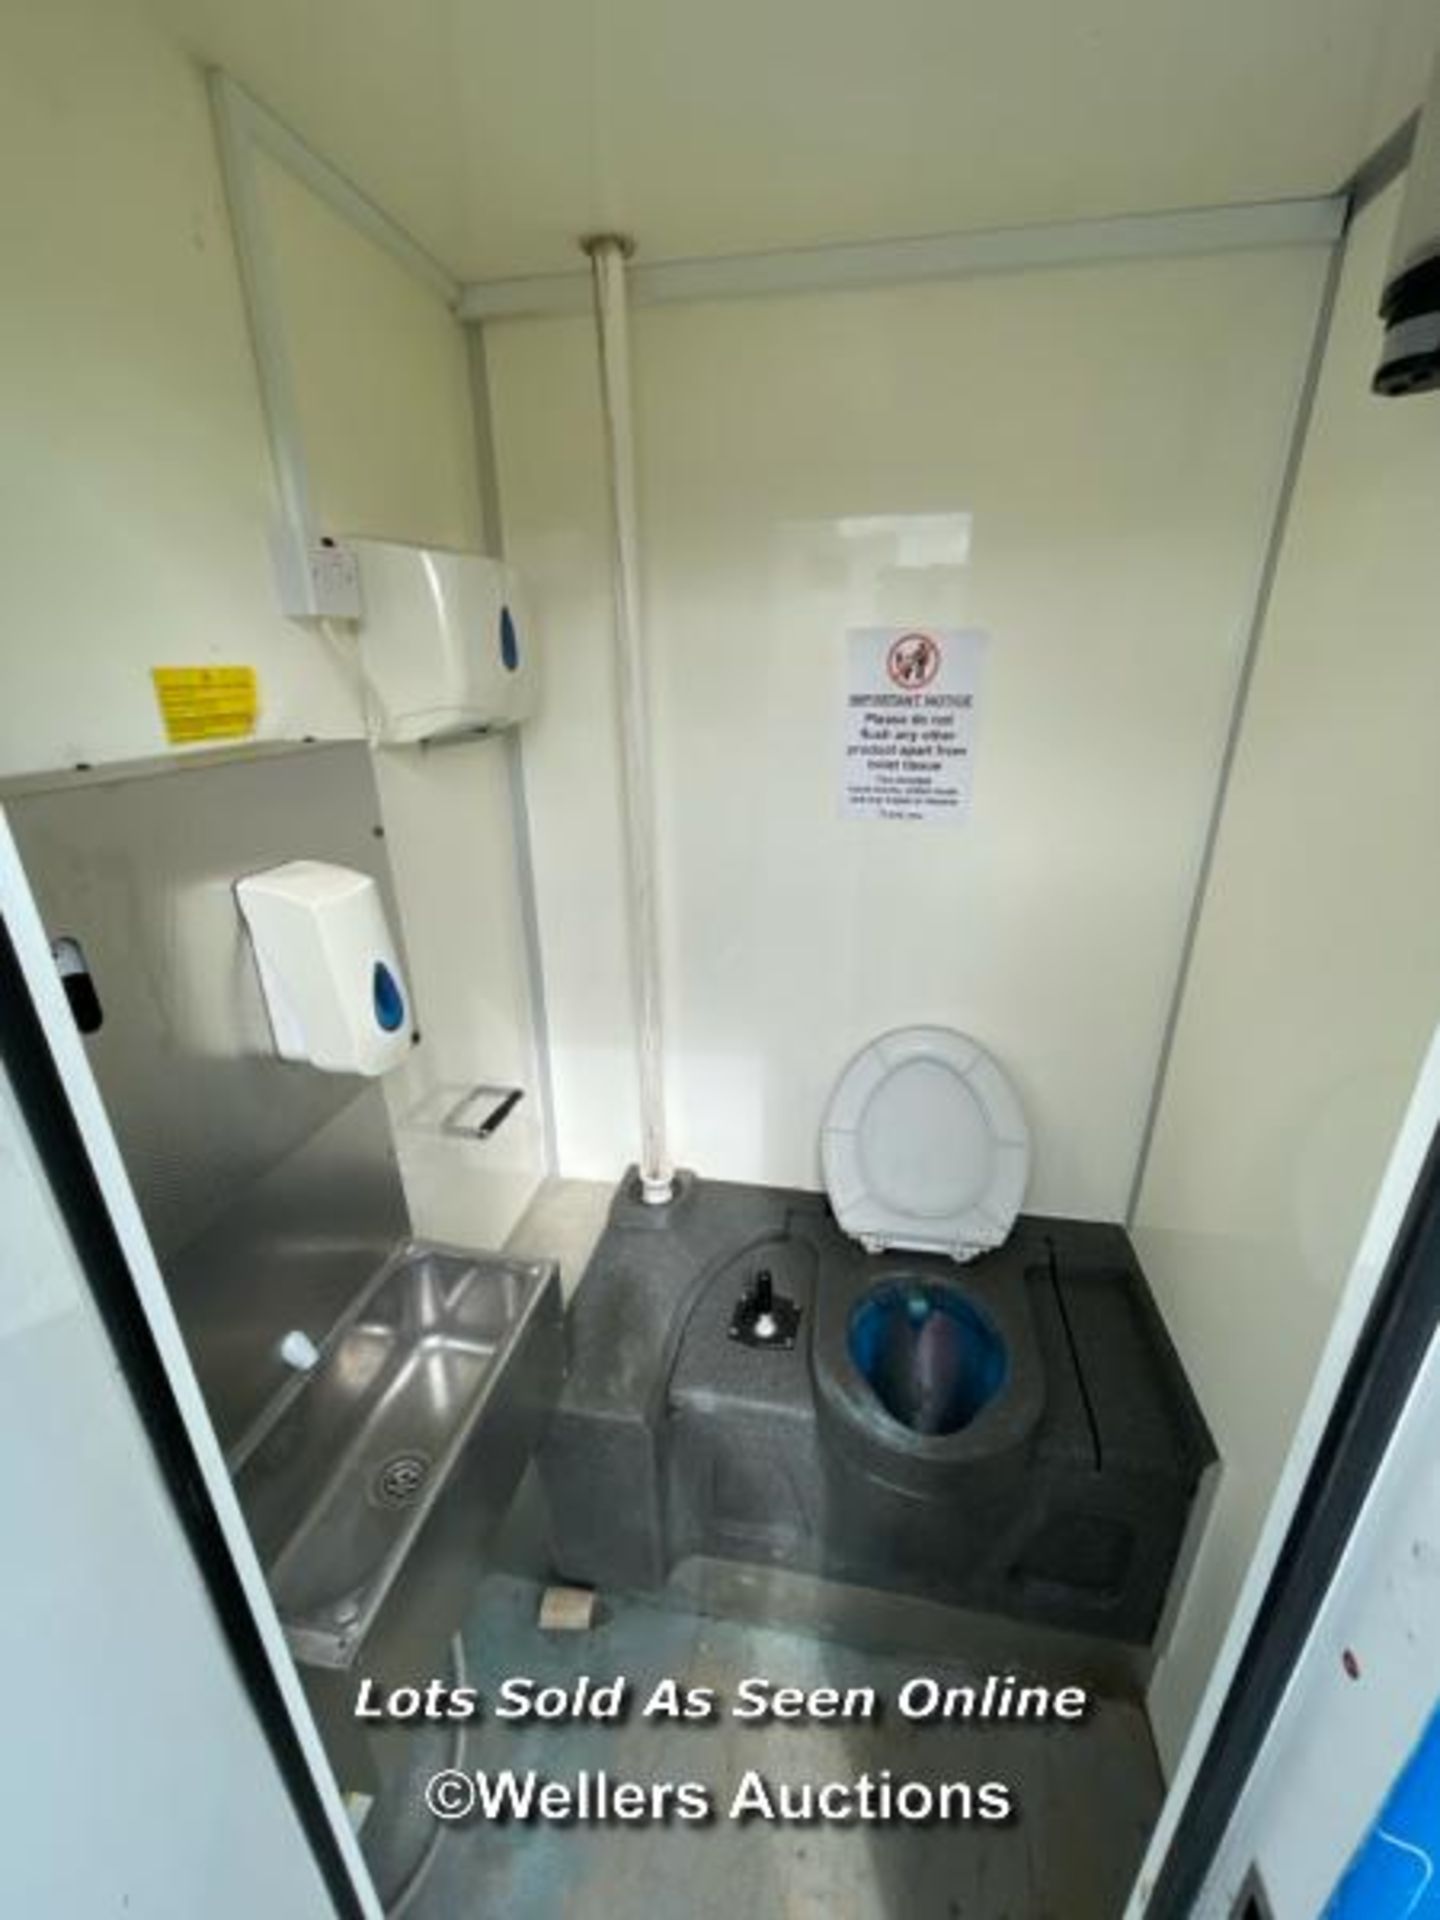 6 PERSON 12 X 7.5FT AJC EASY CABIN TOWABLE WELFARE UNIT, INCLUDES WASH BASIN, KETTLE, MICROWAVE, - Image 11 of 18